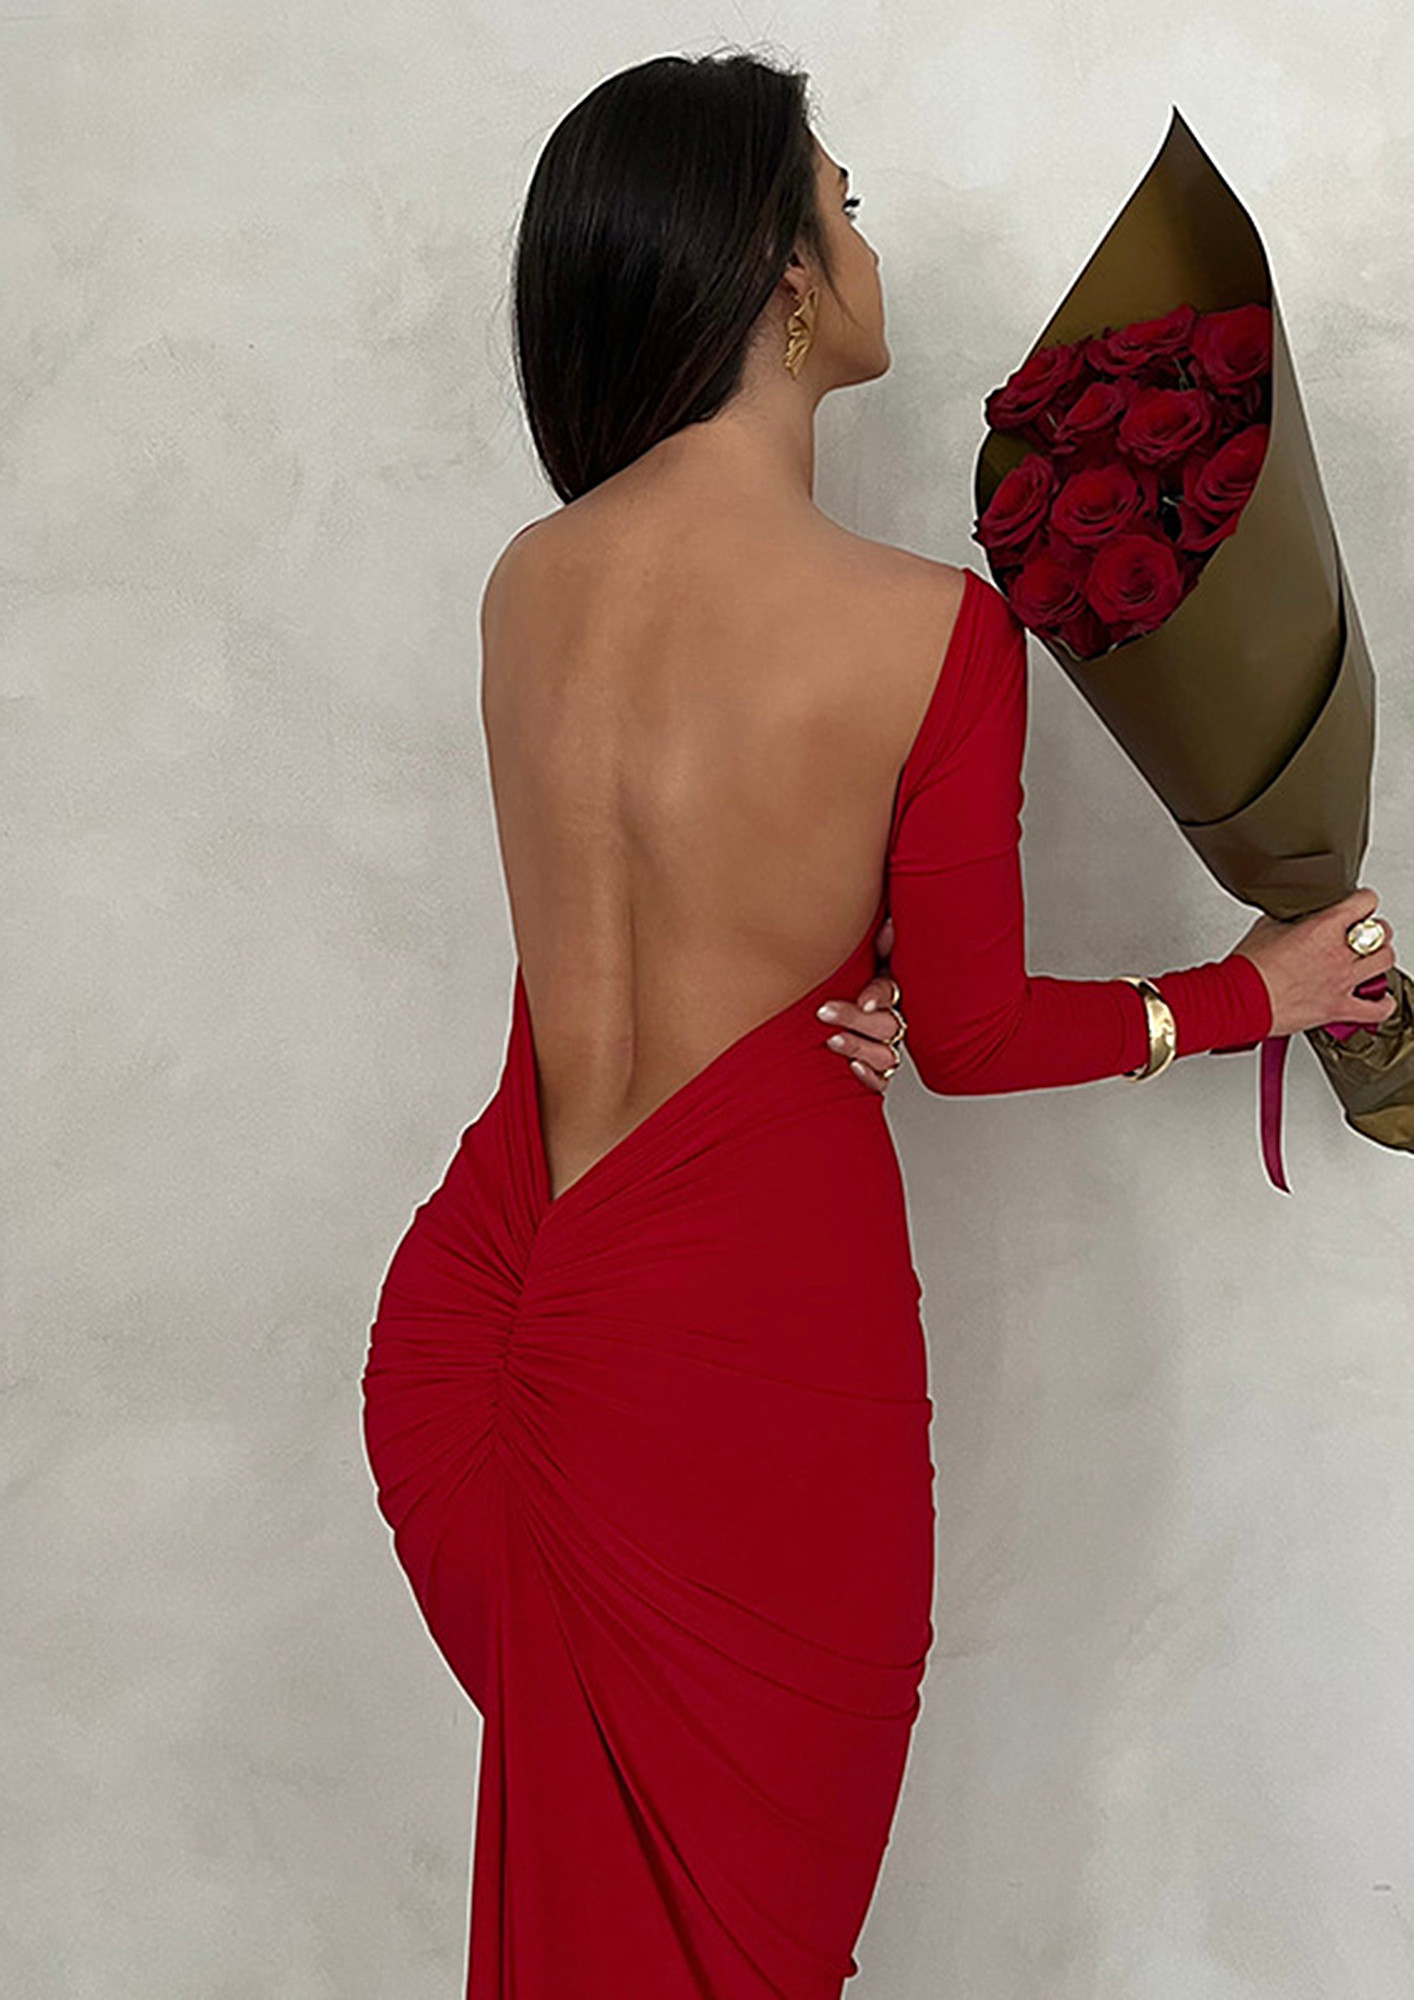 Backless Dresses | Afterpay | Zip Pay | Sezzle | We Ship Worldwide